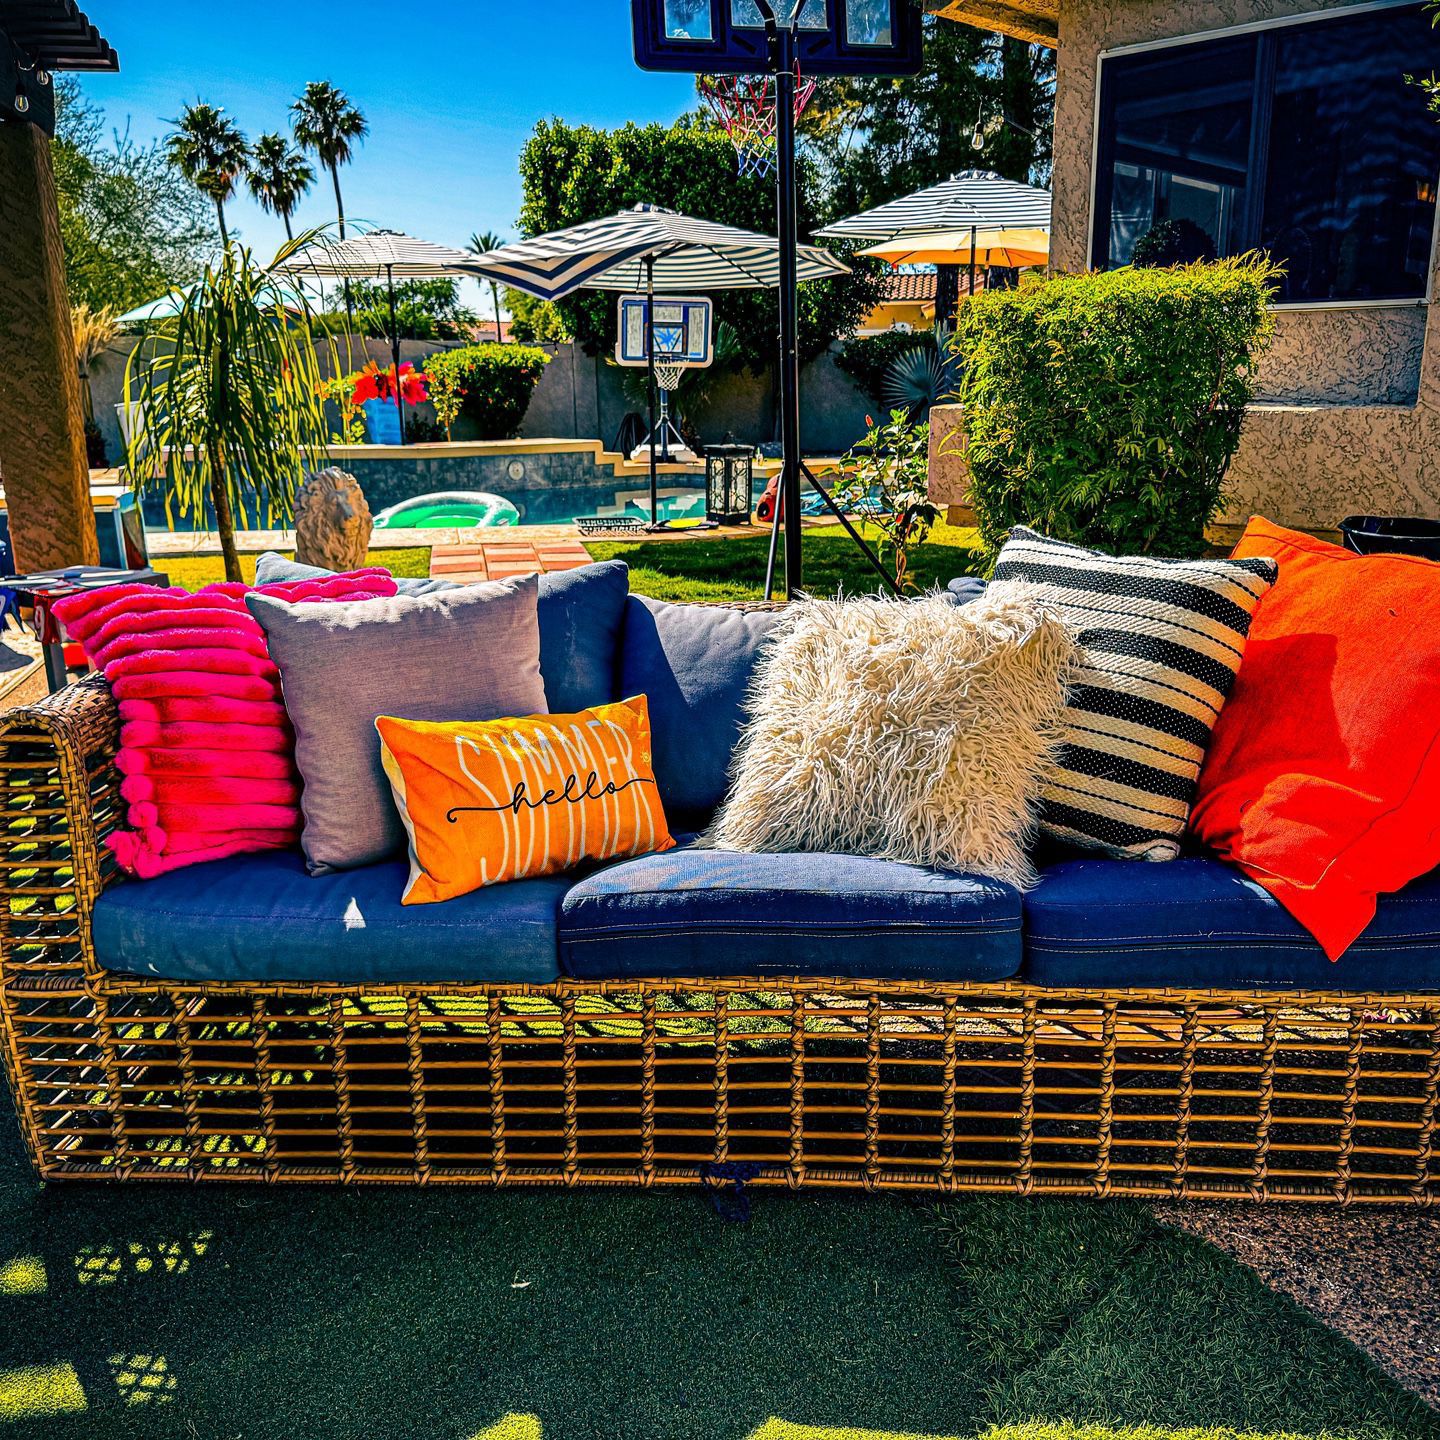  Outdoor Patio/Pool Couch & Chair- Three’s a crowd & 4 is too many 🙈